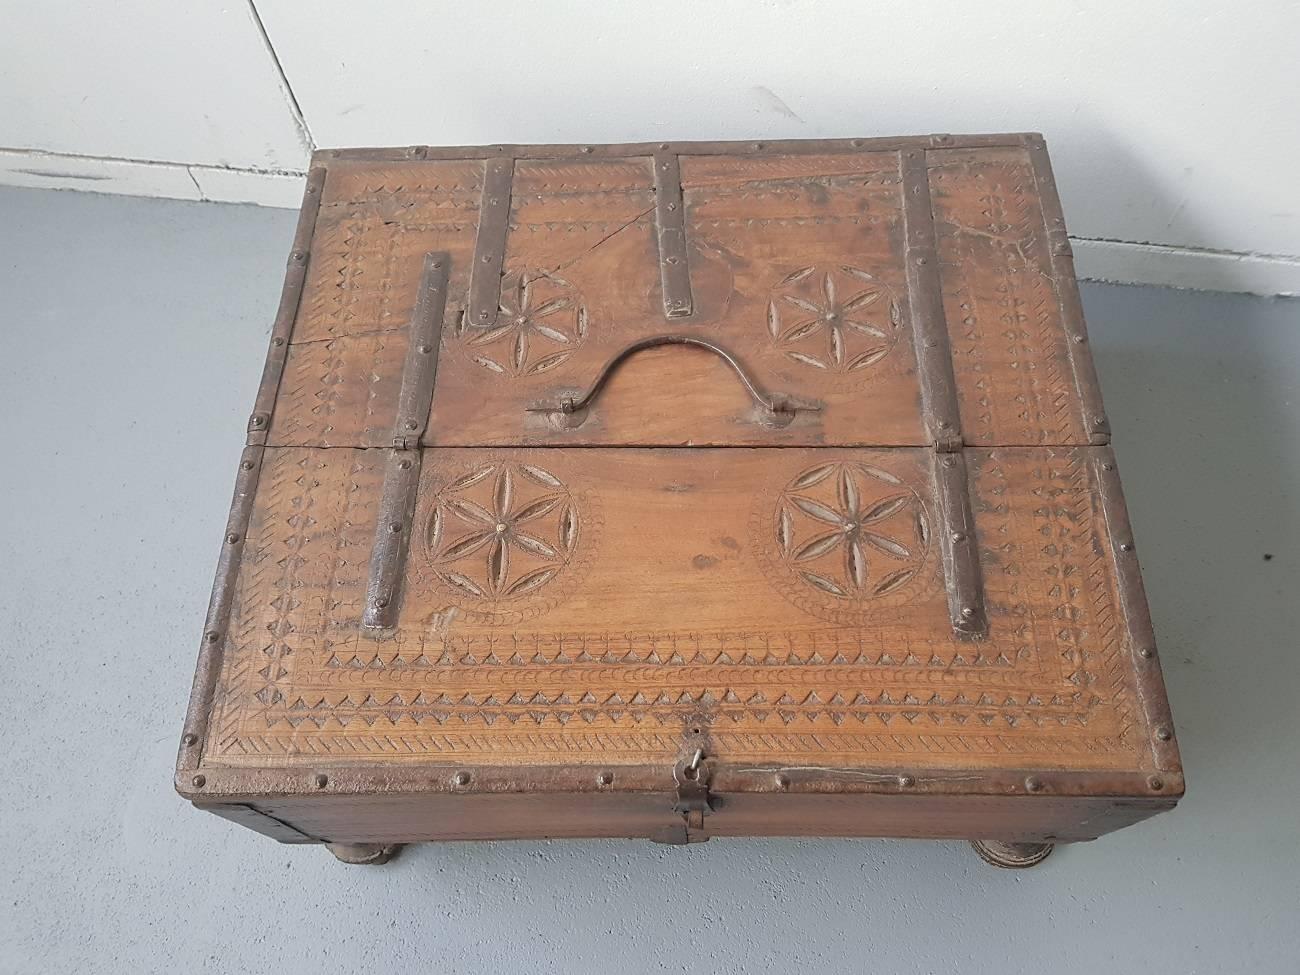 17th-18th century Franco- Flemish spice/salt box, with lift up lid over a rectangular body set on four turned feet, all-over wheel carvings, oak body with pine secondary wood, old varnish finish over a dark surface.

The measurements are,
Depth